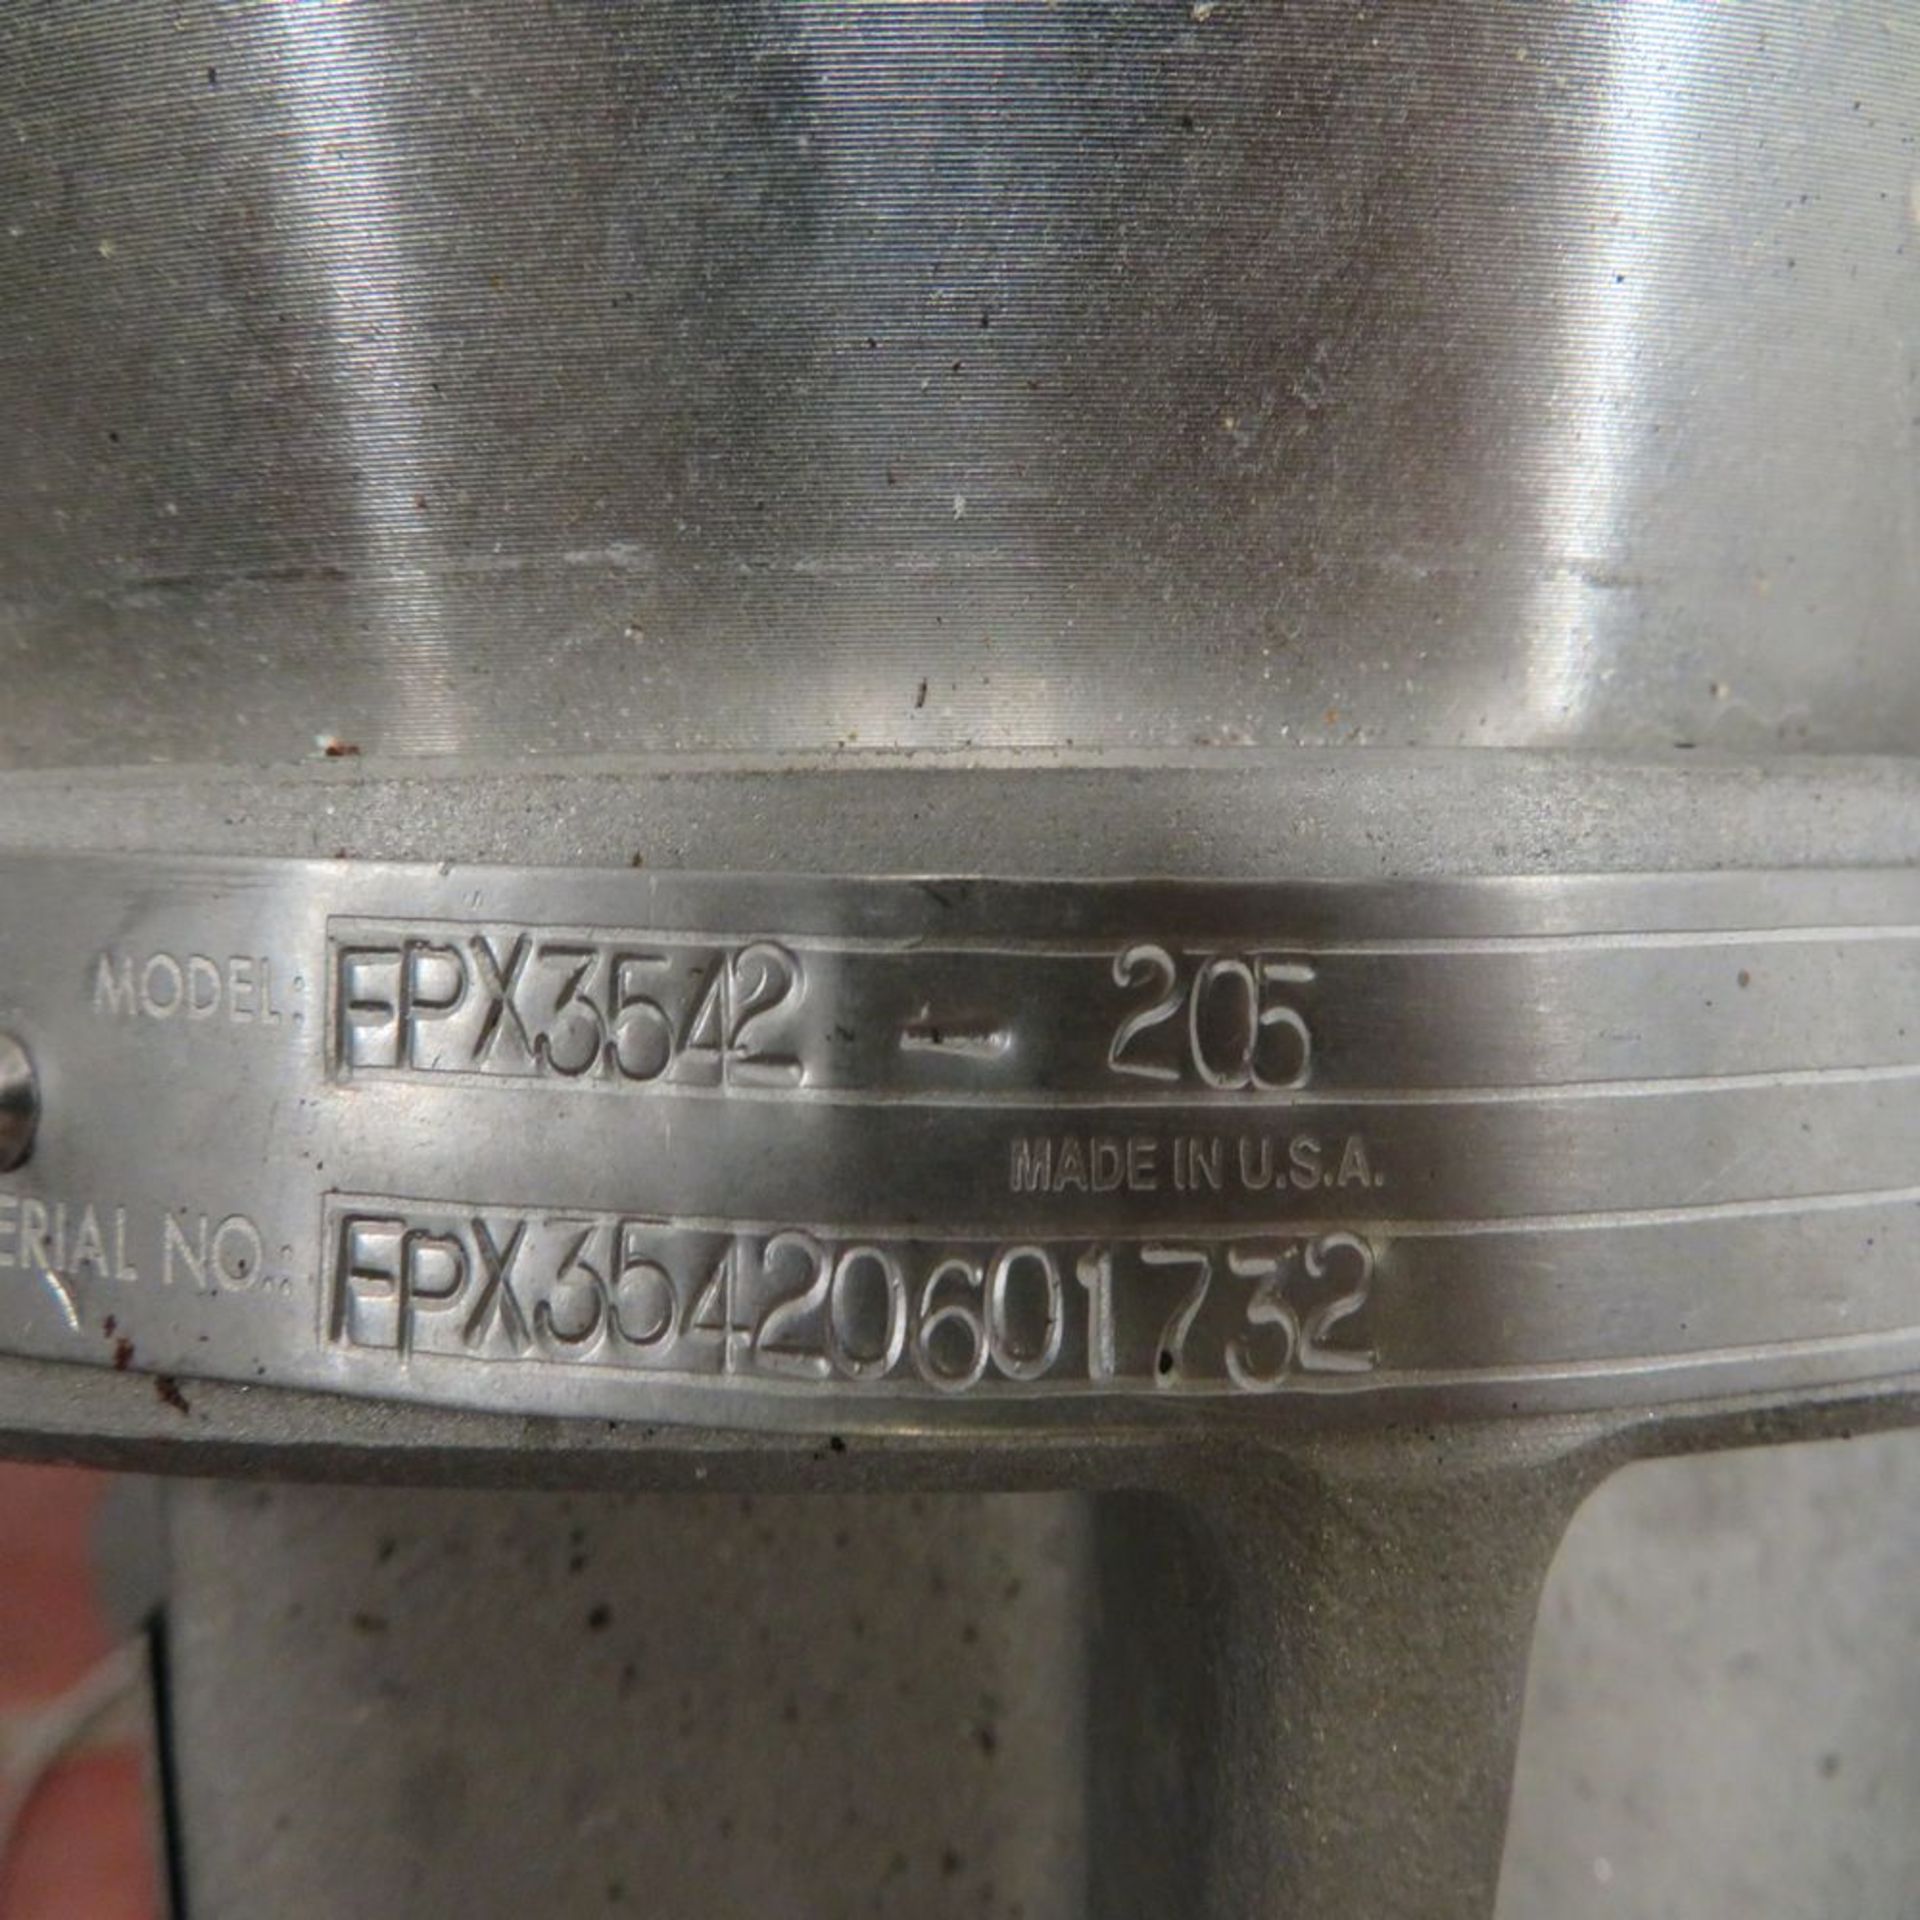 Fristam mod. FPX-35420601752, 30hp, S.S. Centrifugal Pump, 3.5'' In & Out - Image 2 of 2